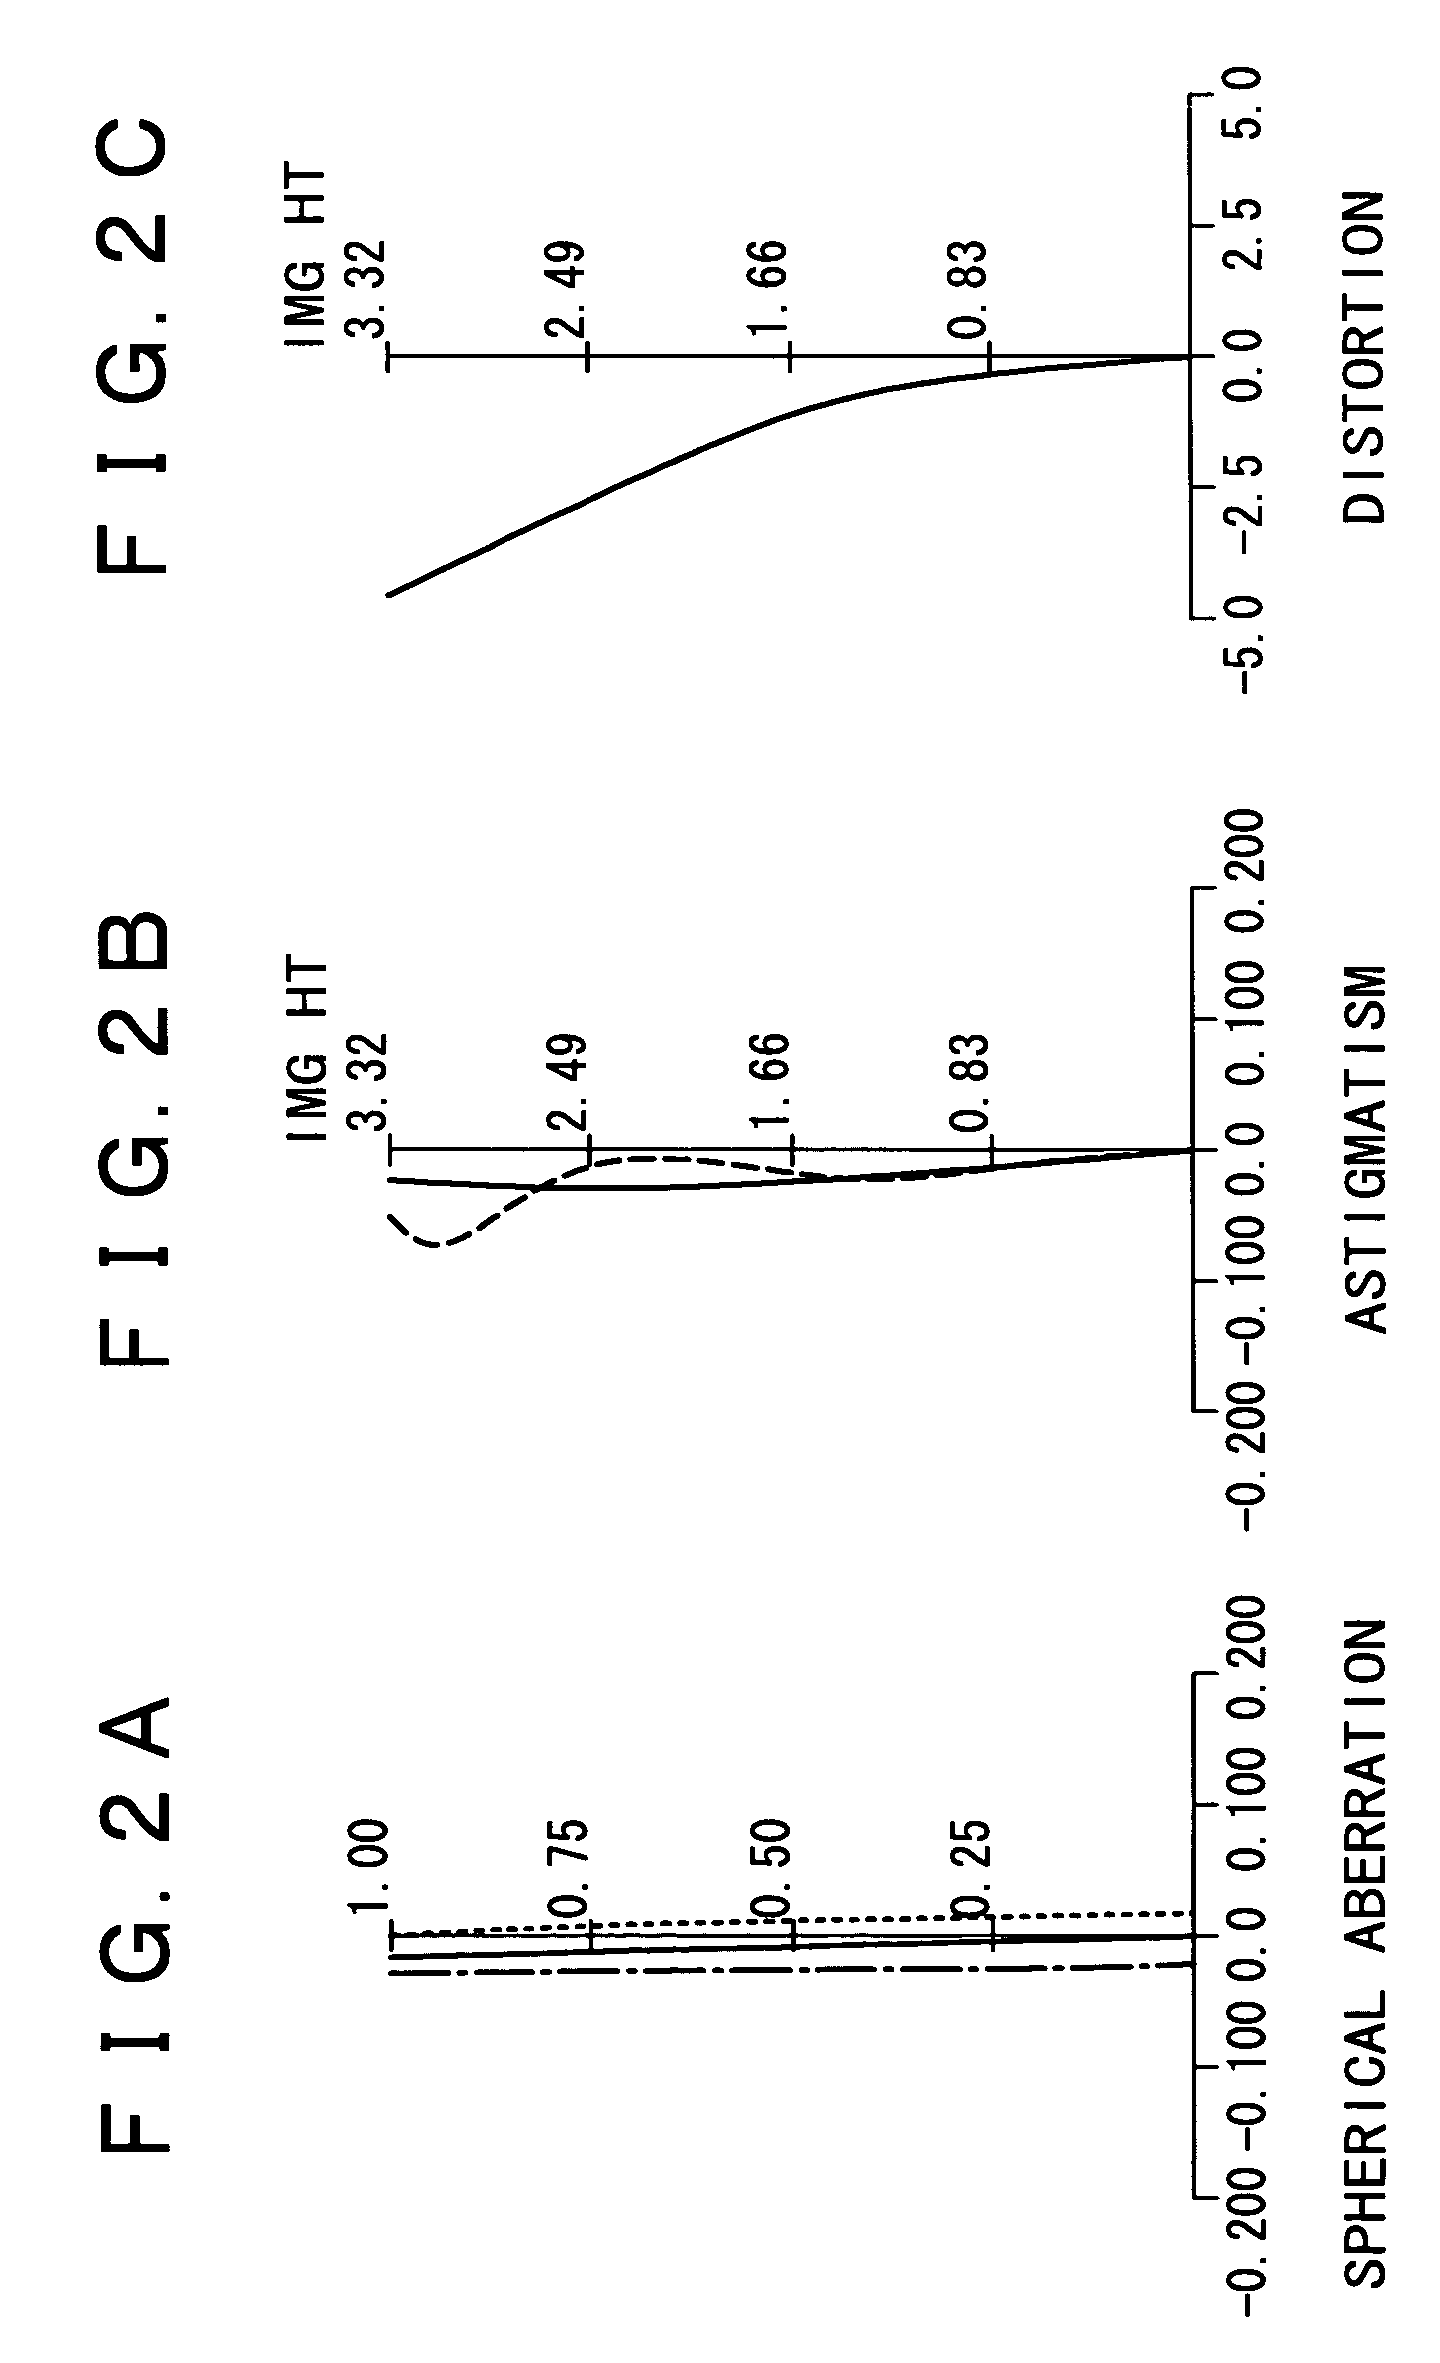 Zoom lens and imaging device